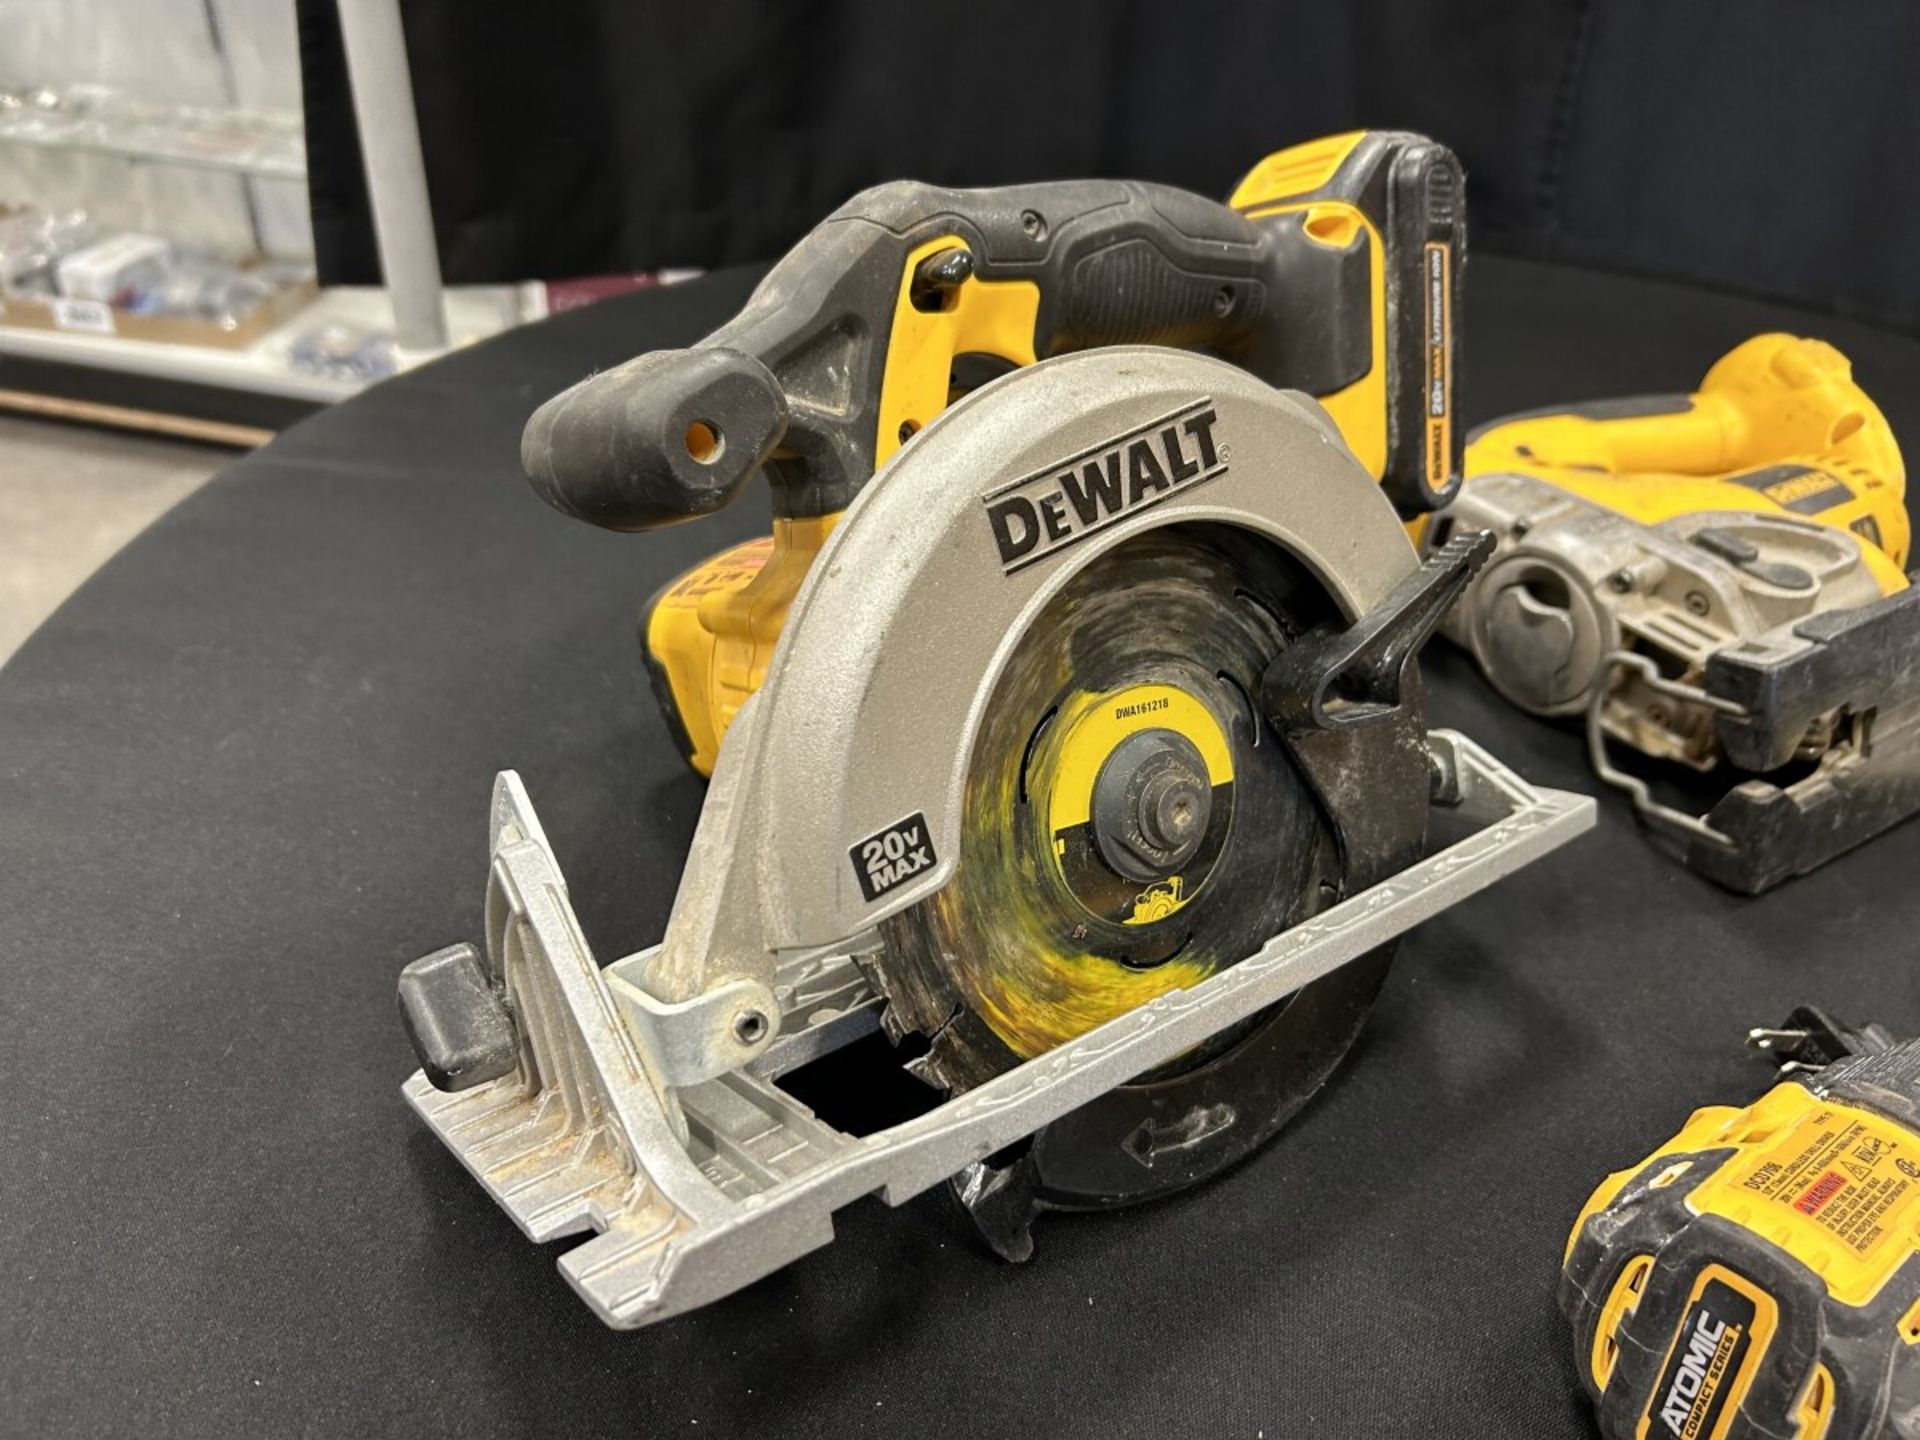 DEWALT CORDLESS JIG SAW, CIRCULAR SAW, DRILL, 2 BATTERIES AND 2 CHARGERS - B40 - Image 3 of 14